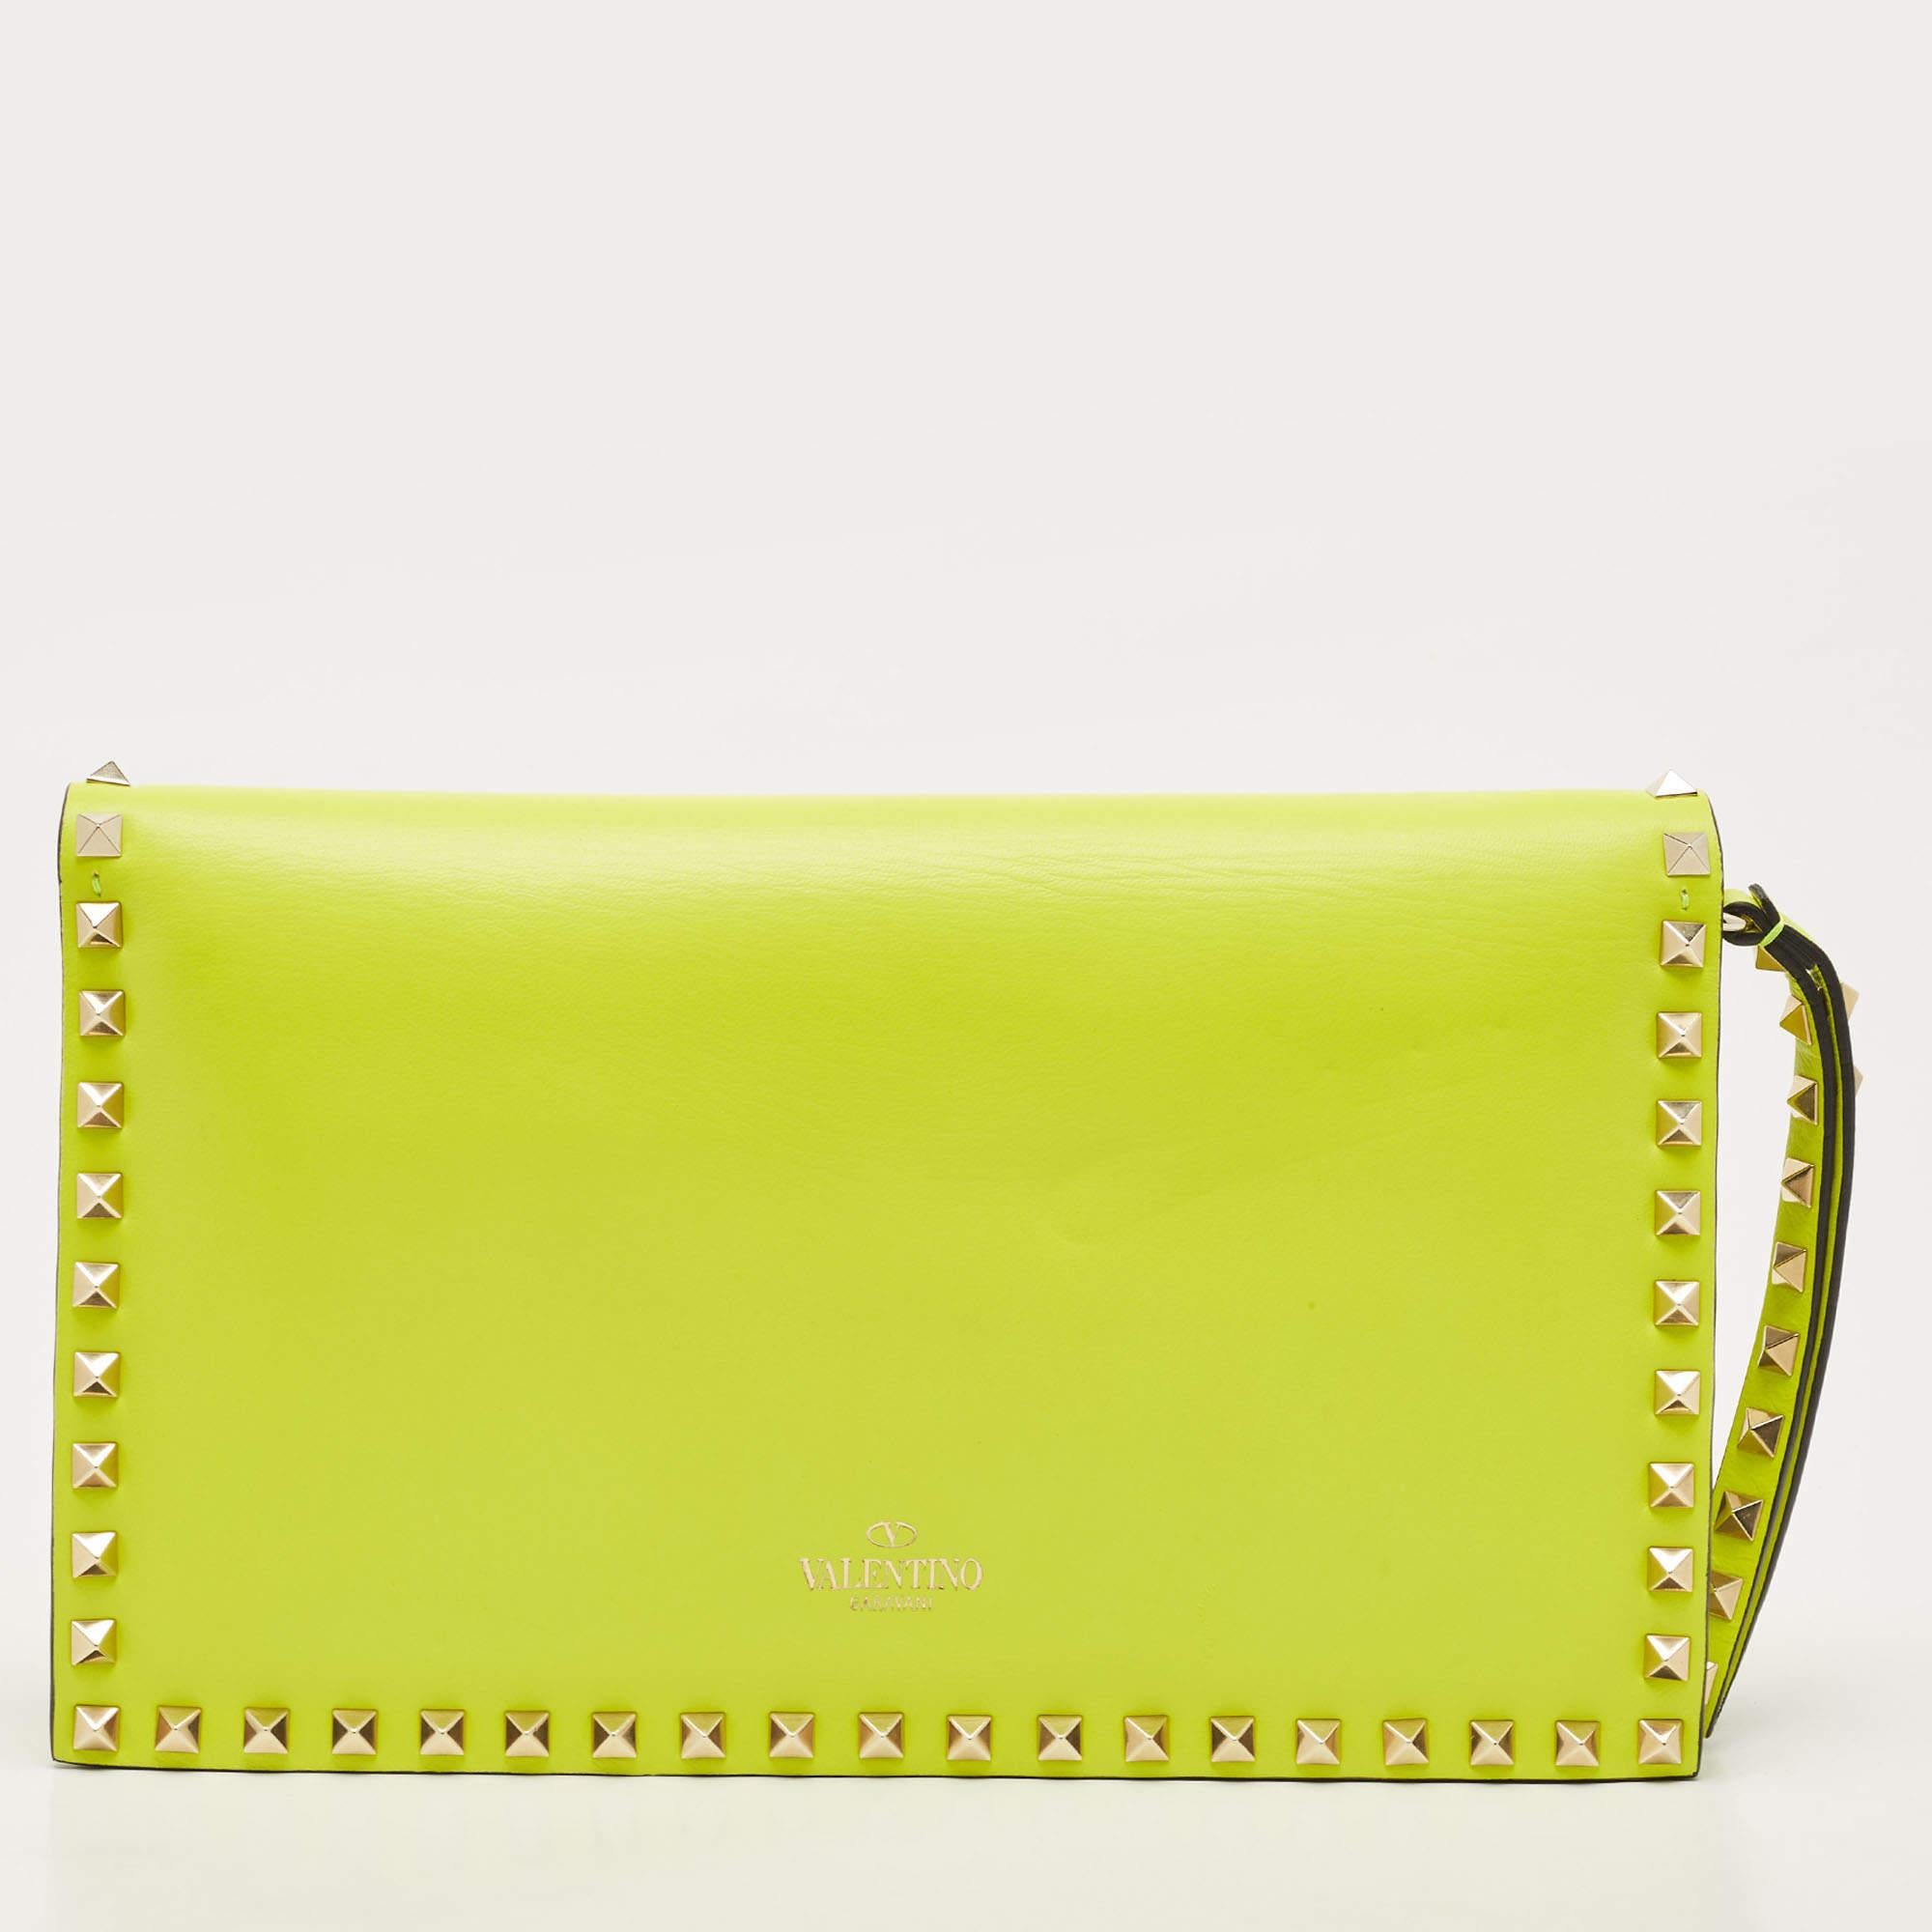 The Valentino clutch is a vibrant and stylish accessory. Crafted from high-quality neon yellow leather, it features the iconic Rockstud detailing and a convenient wristlet strap. The flap closure adds a touch of elegance, making it perfect for any